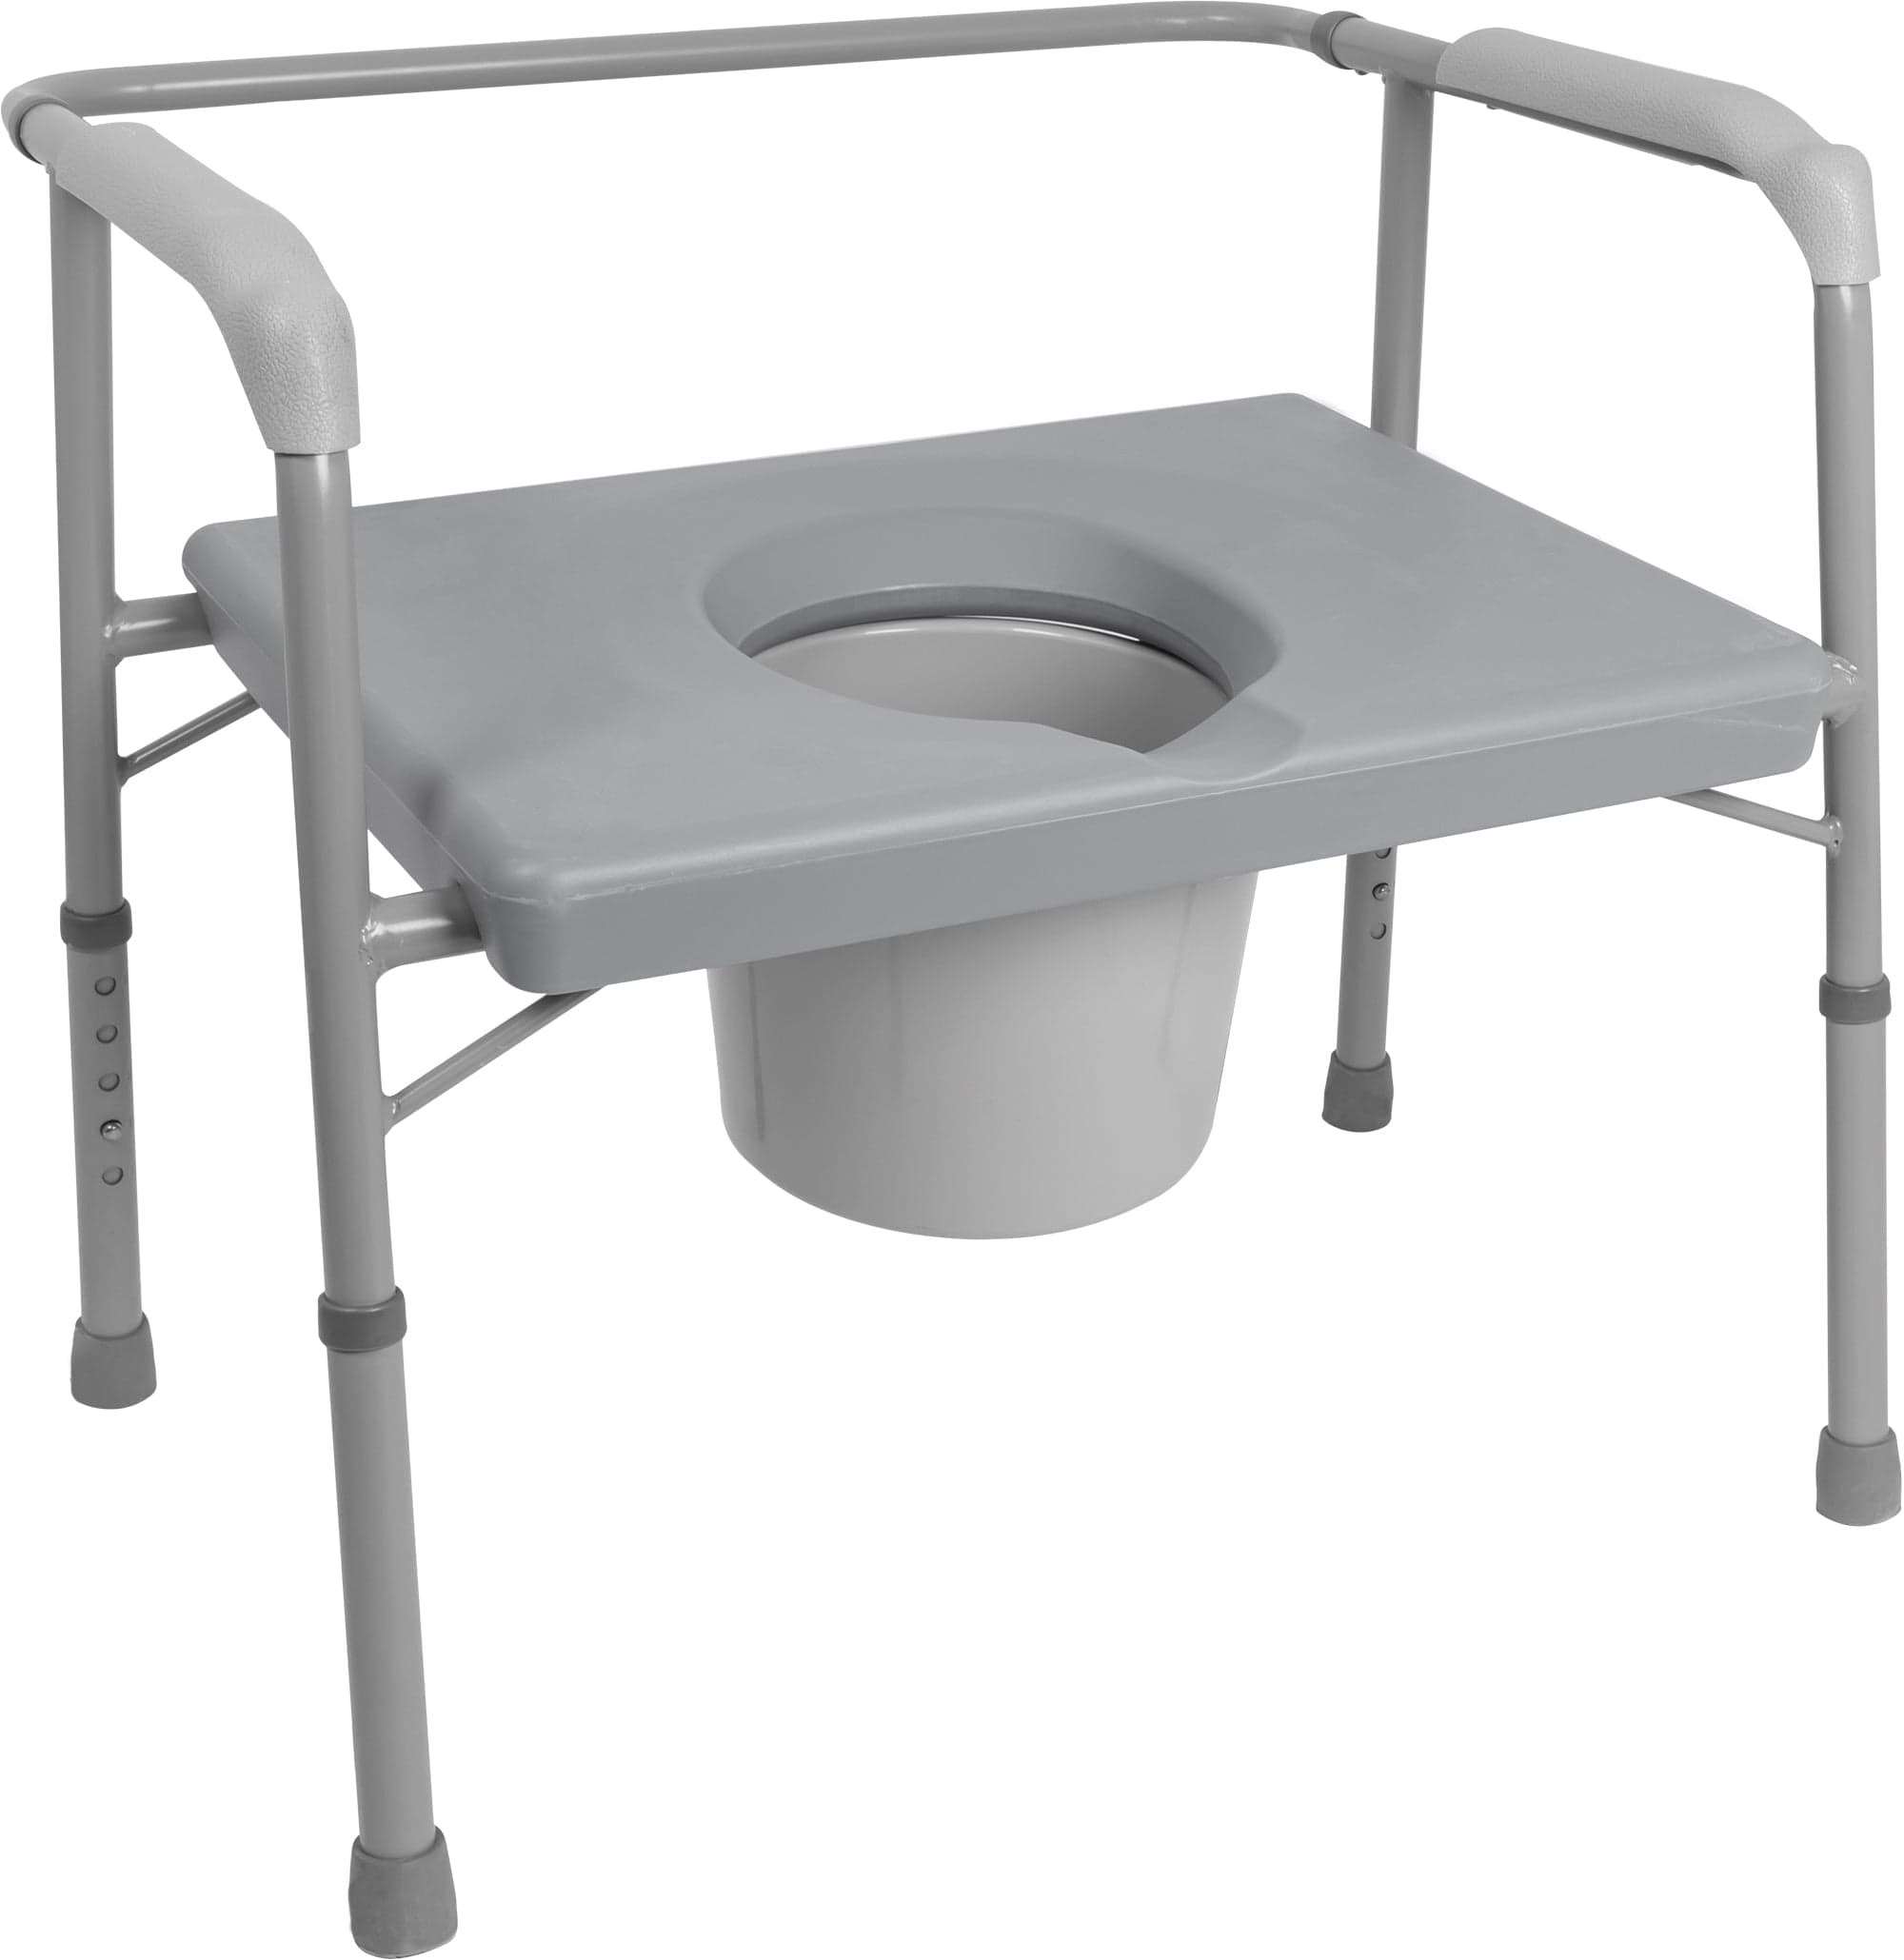 Compass Health Commodes Compass Health ProBasics Bariatric Commode with Extra Wide Seat